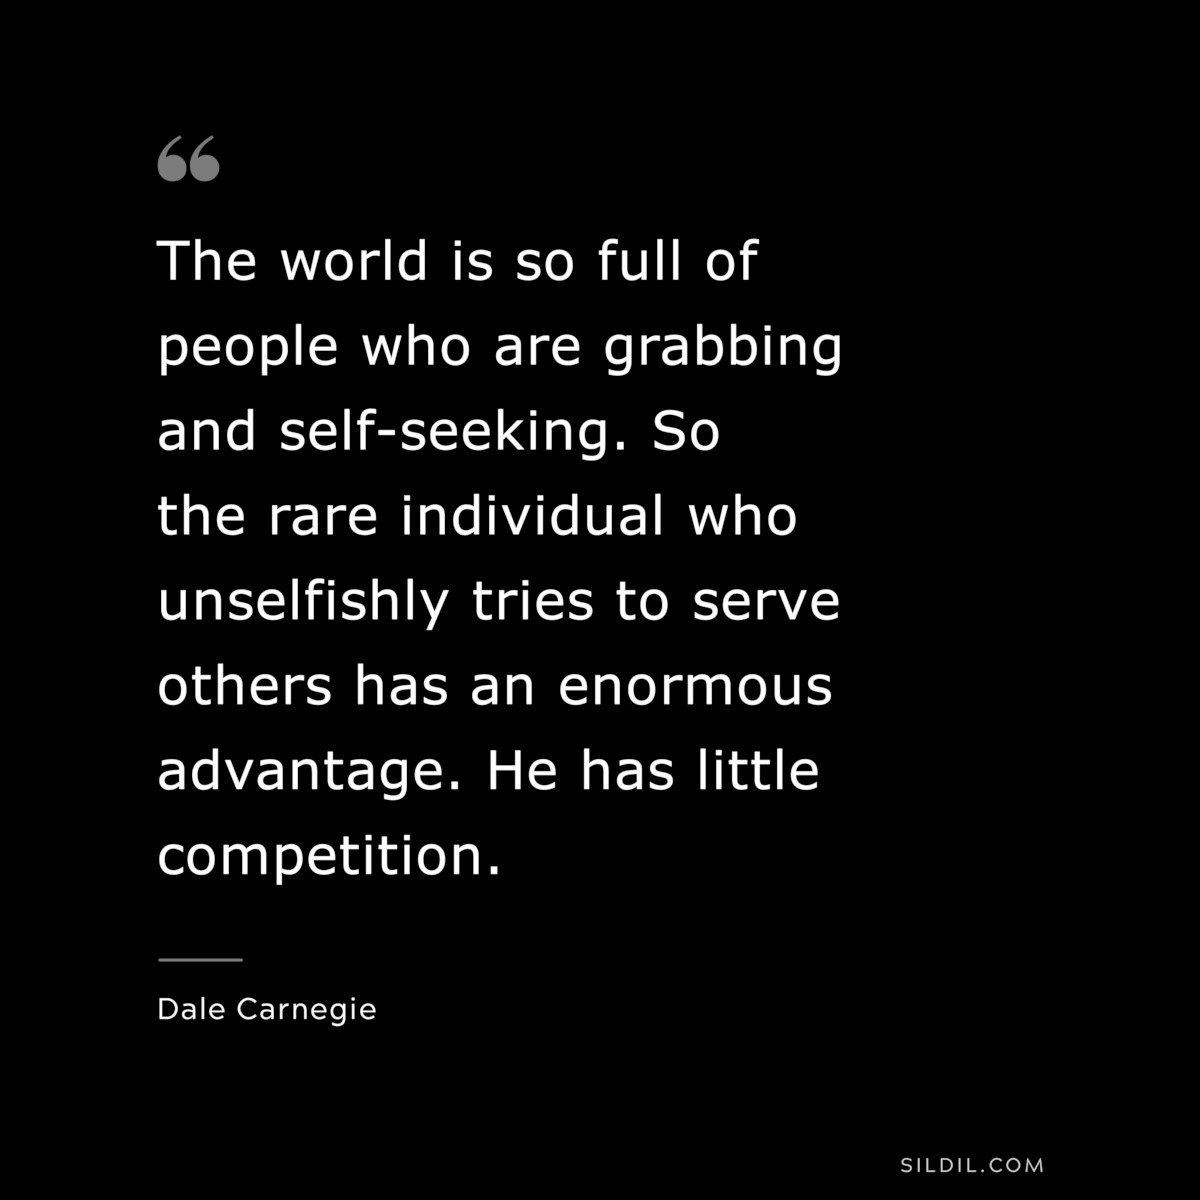 The world is so full of people who are grabbing and self-seeking. So the rare individual who unselfishly tries to serve others has an enormous advantage. He has little competition.― Dale Carnegie